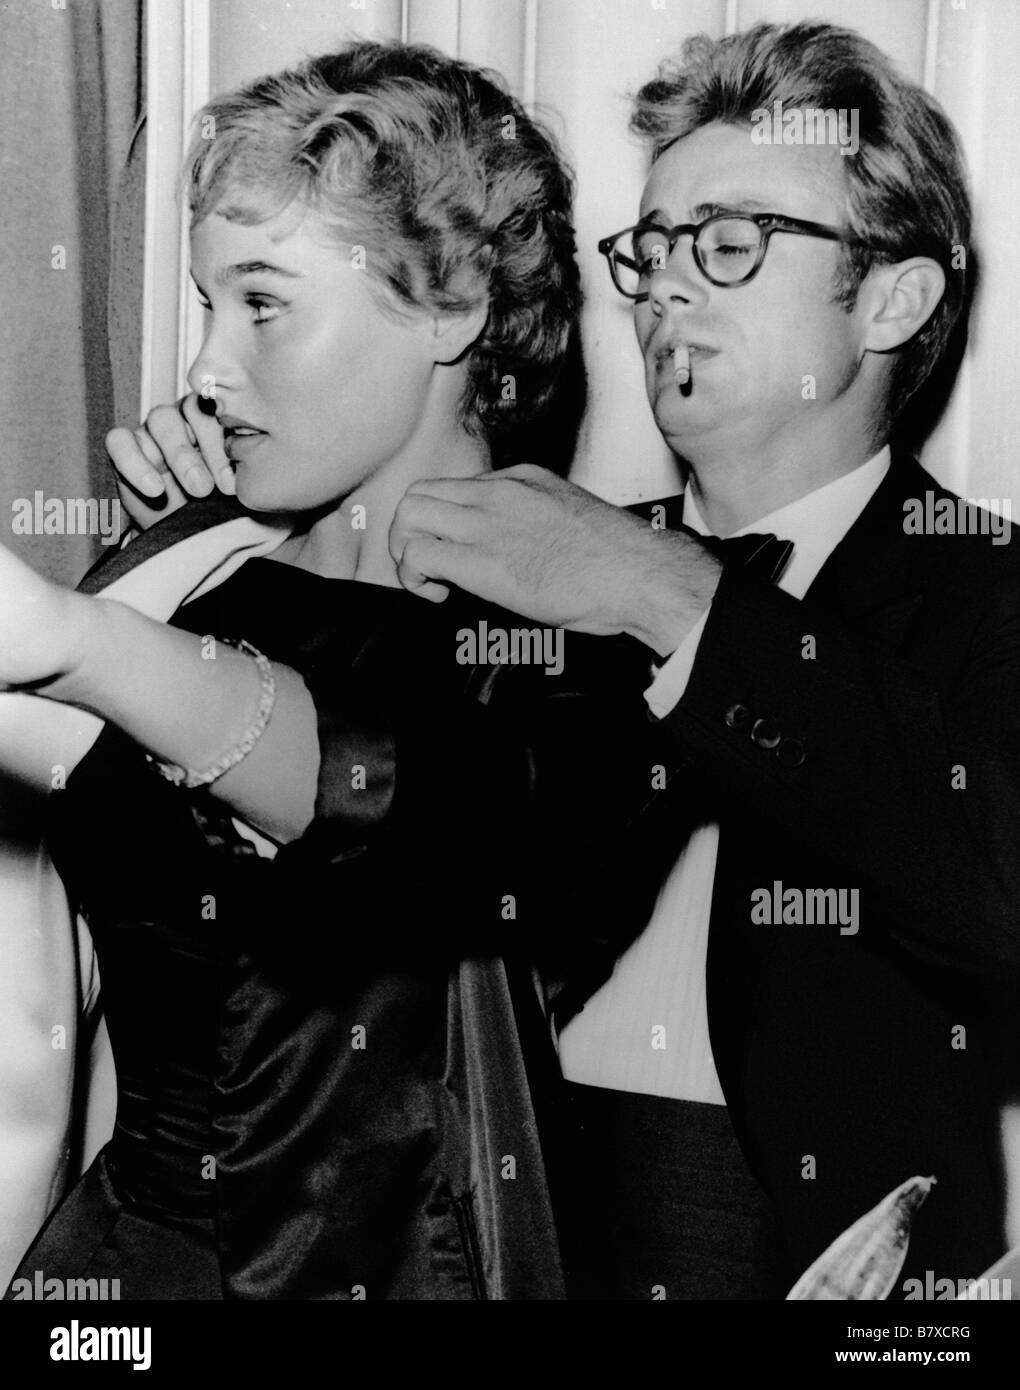 James Dean and Ursula Andress attending the Thalian Ball at Ciro's nightclub in Loas Angeles. August 29, 1955 Stock Photo